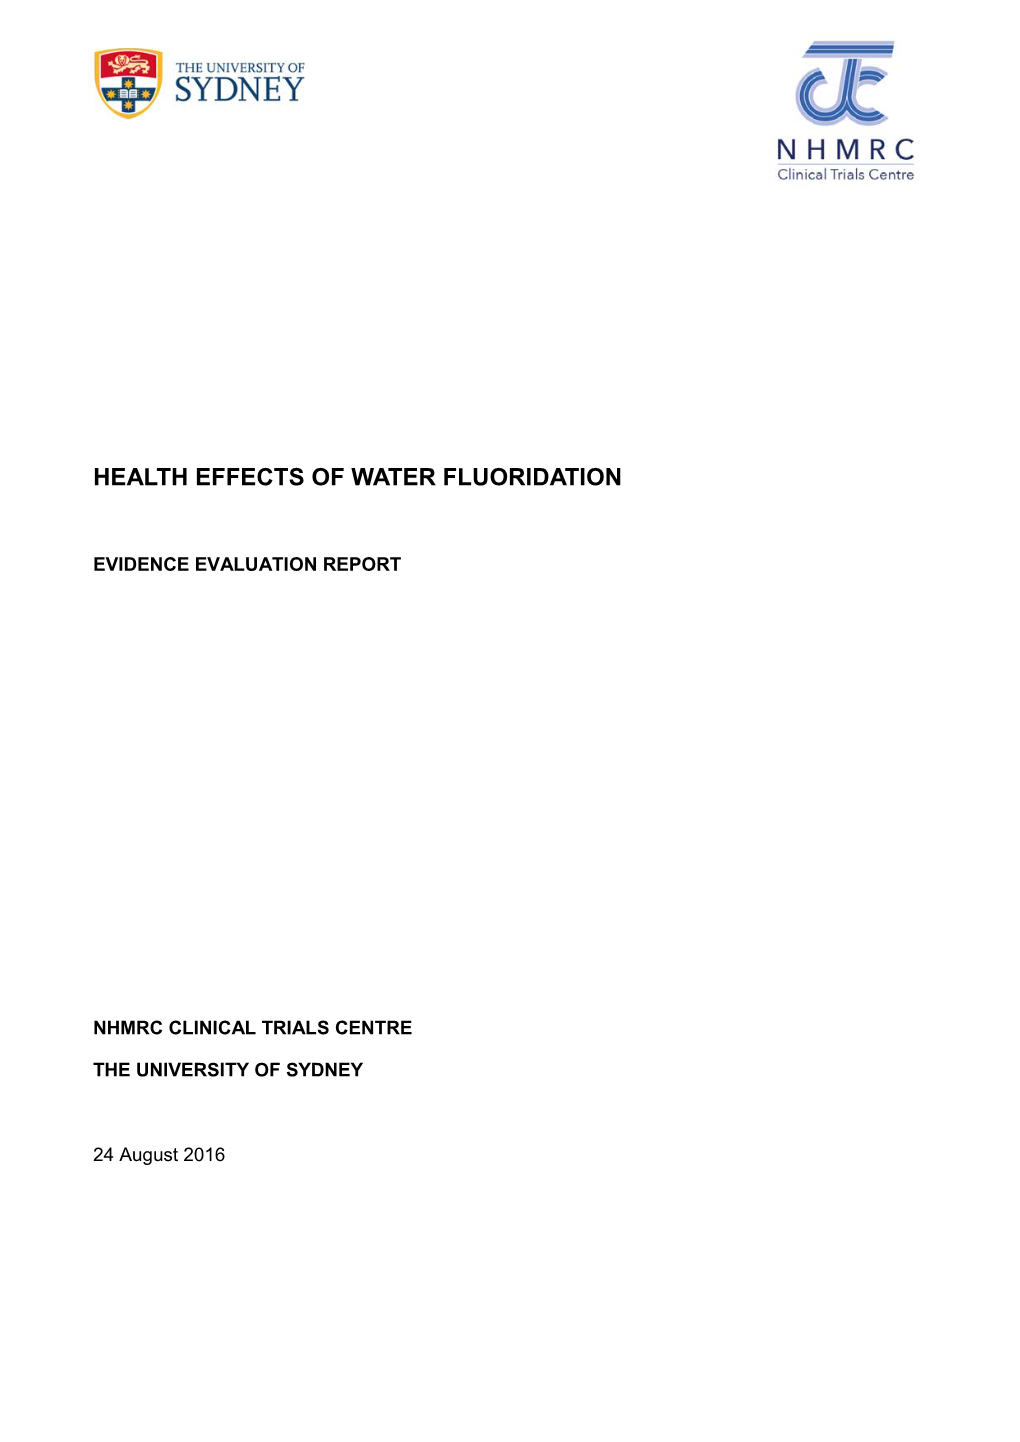 Health Effects of Water Fluoridation